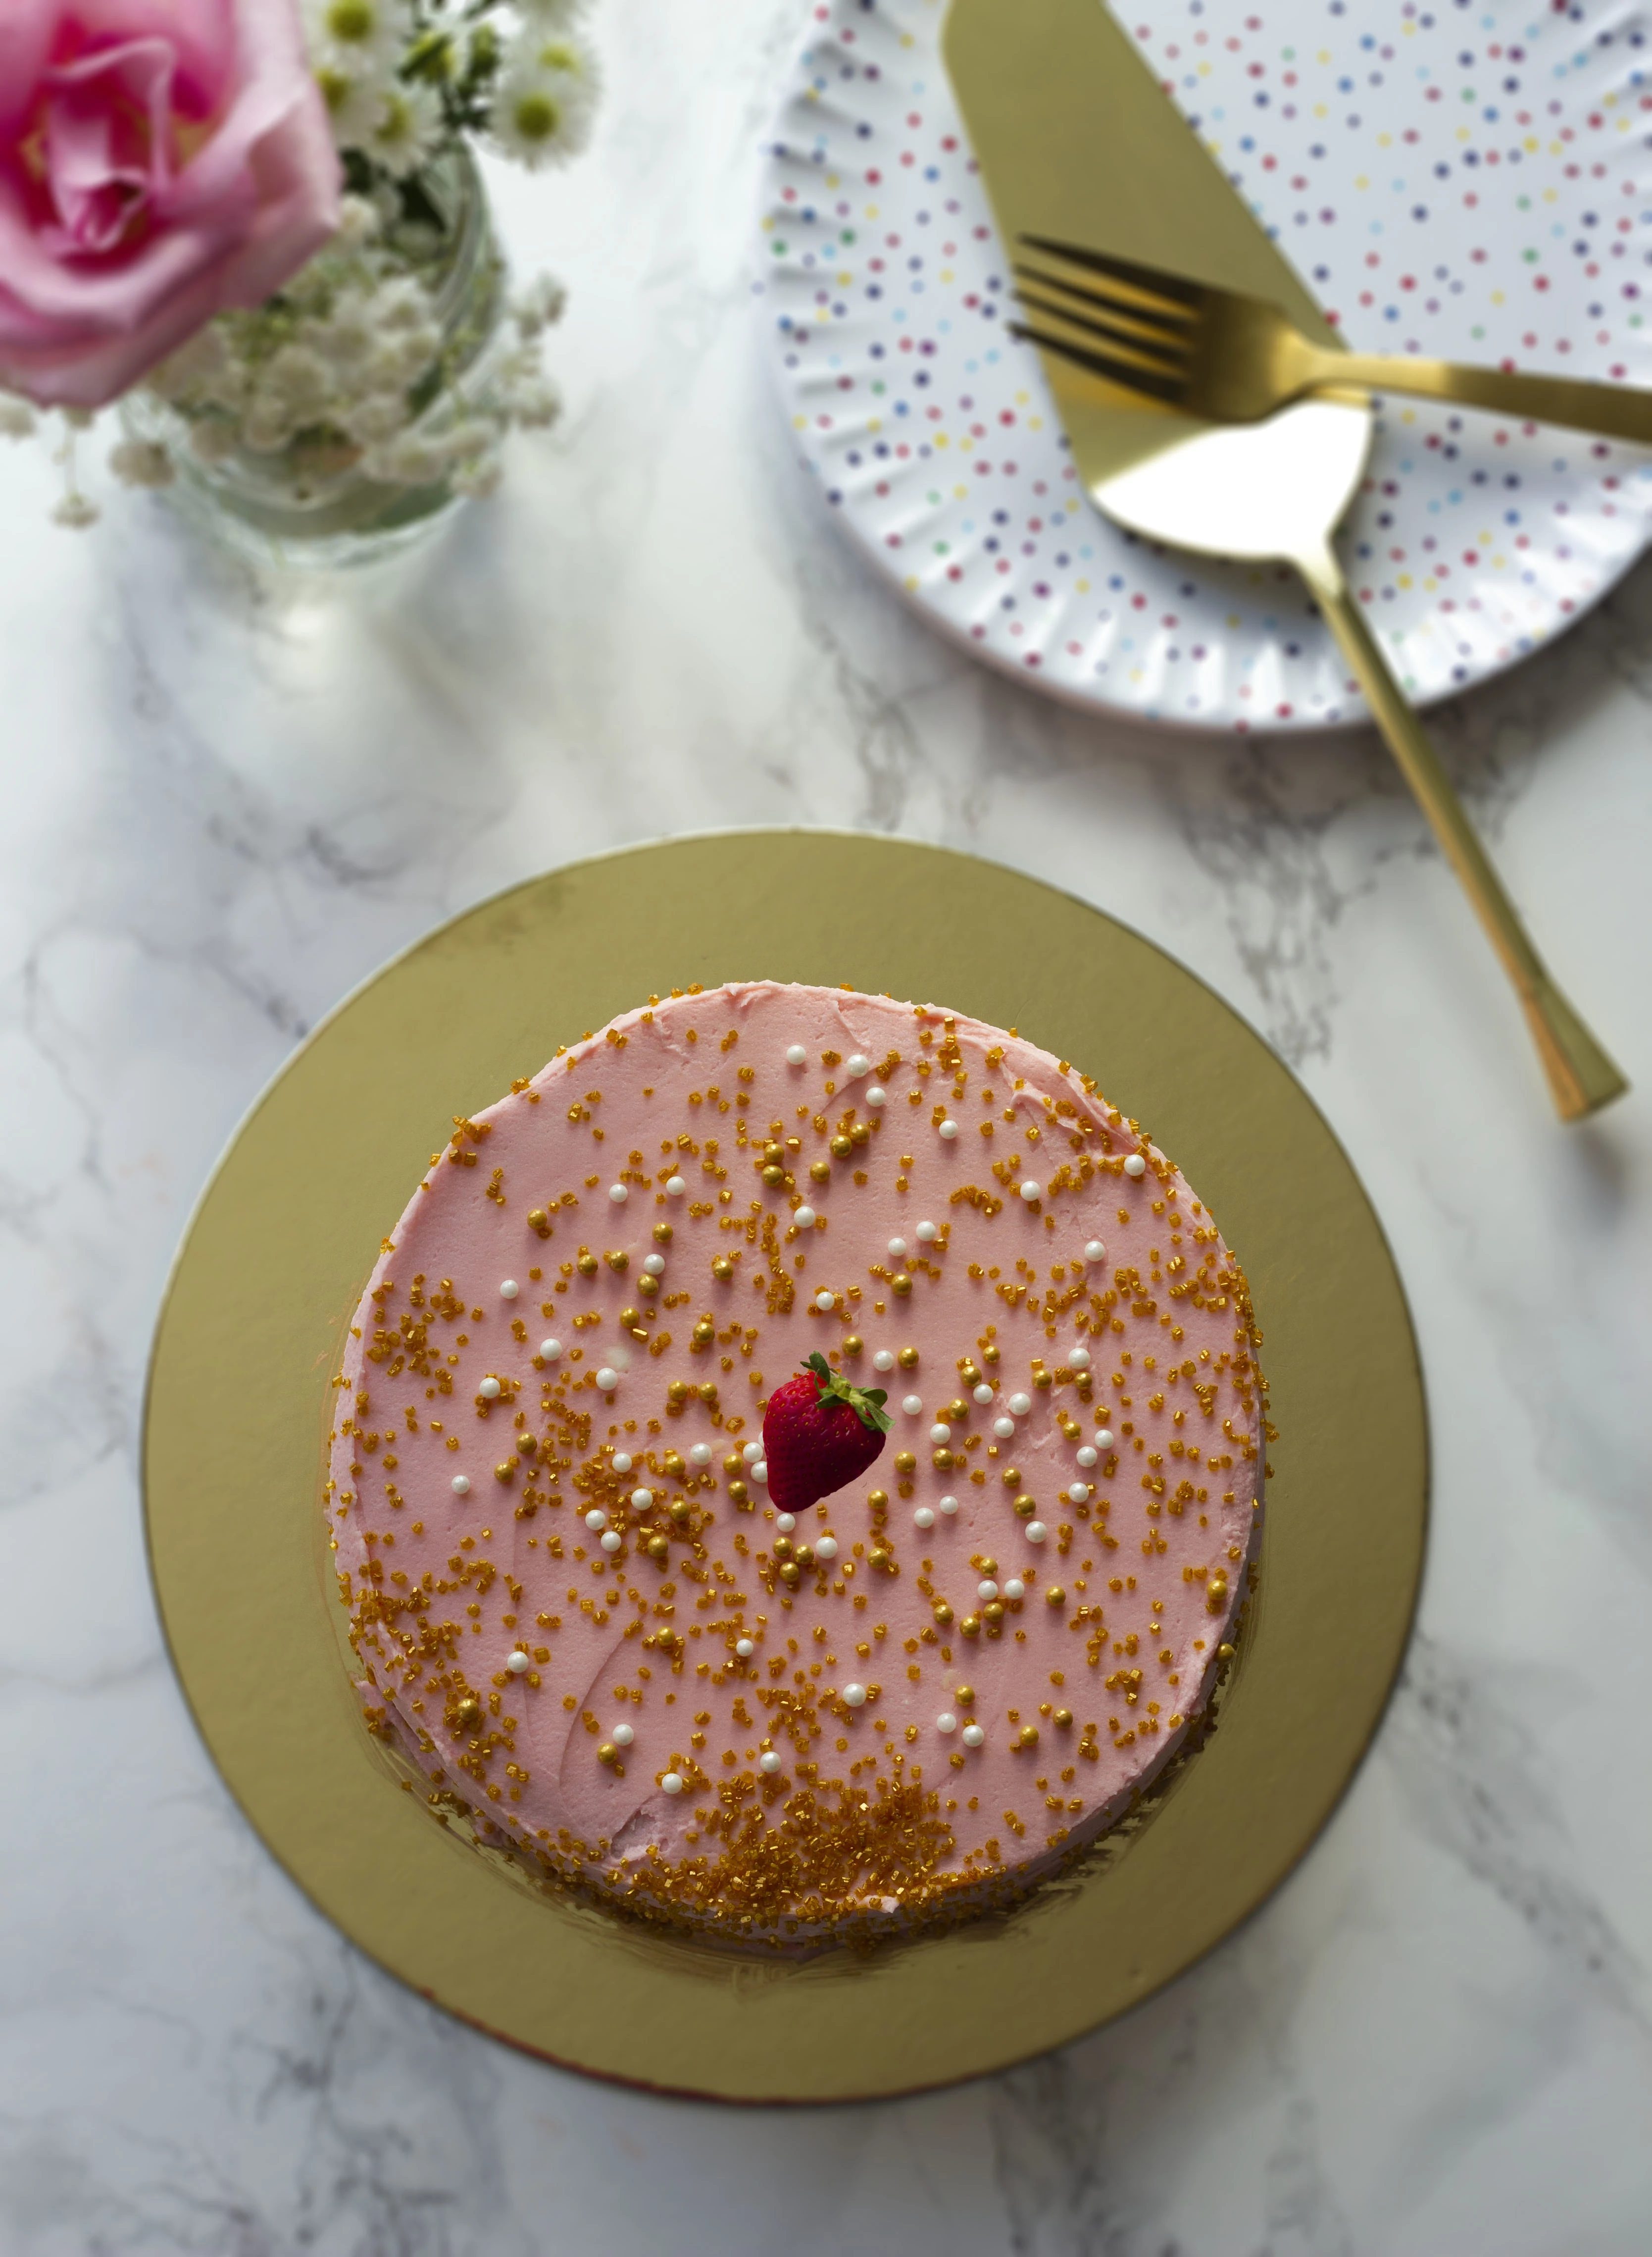 Sweet and pink keto strawberry cake with strawberry buttercream icing. Basic ingredients, easy to make, and just 3 net carbs per slice. 